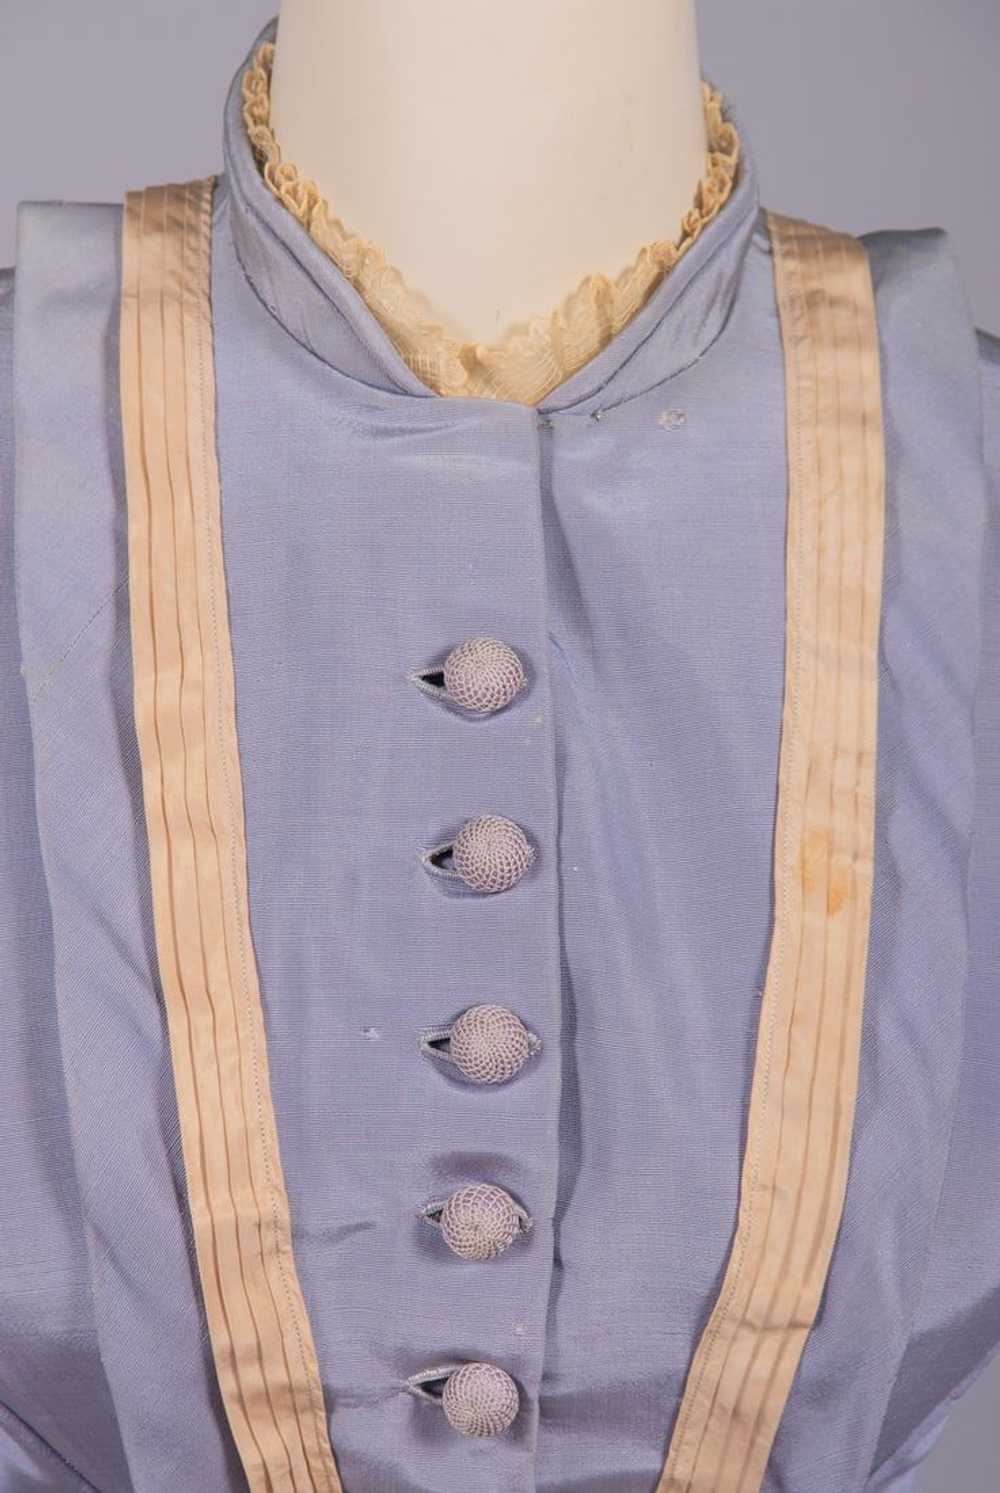 PERIWINKLE SILK FAILLE DAY DRESS, c. 1867 - image 8